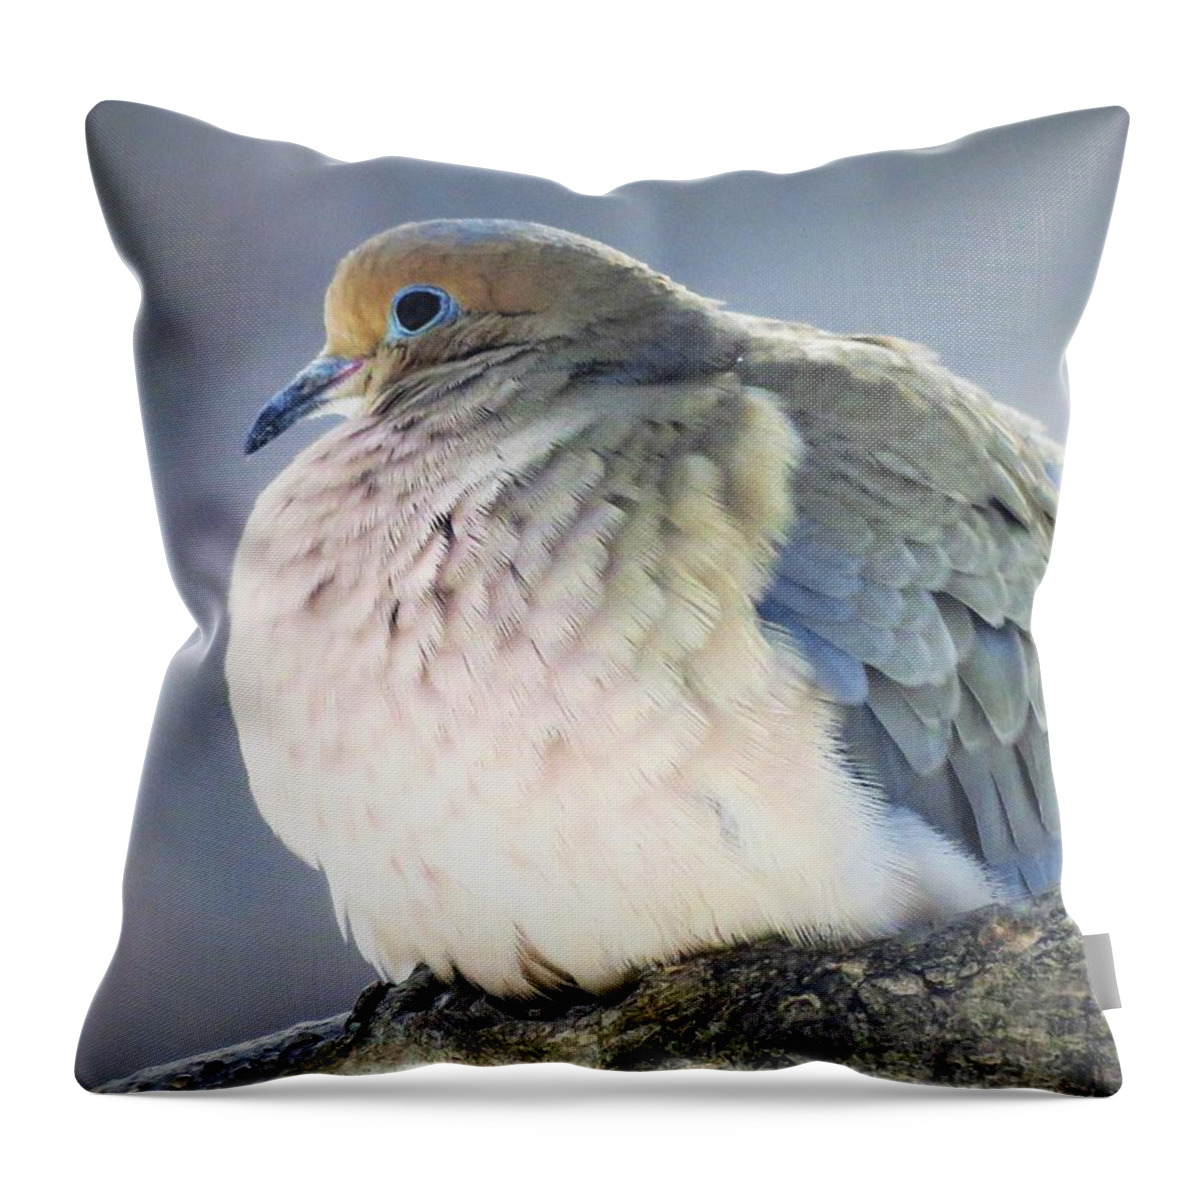 Birds Throw Pillow featuring the photograph Pretty Mourning Dove by Lori Frisch